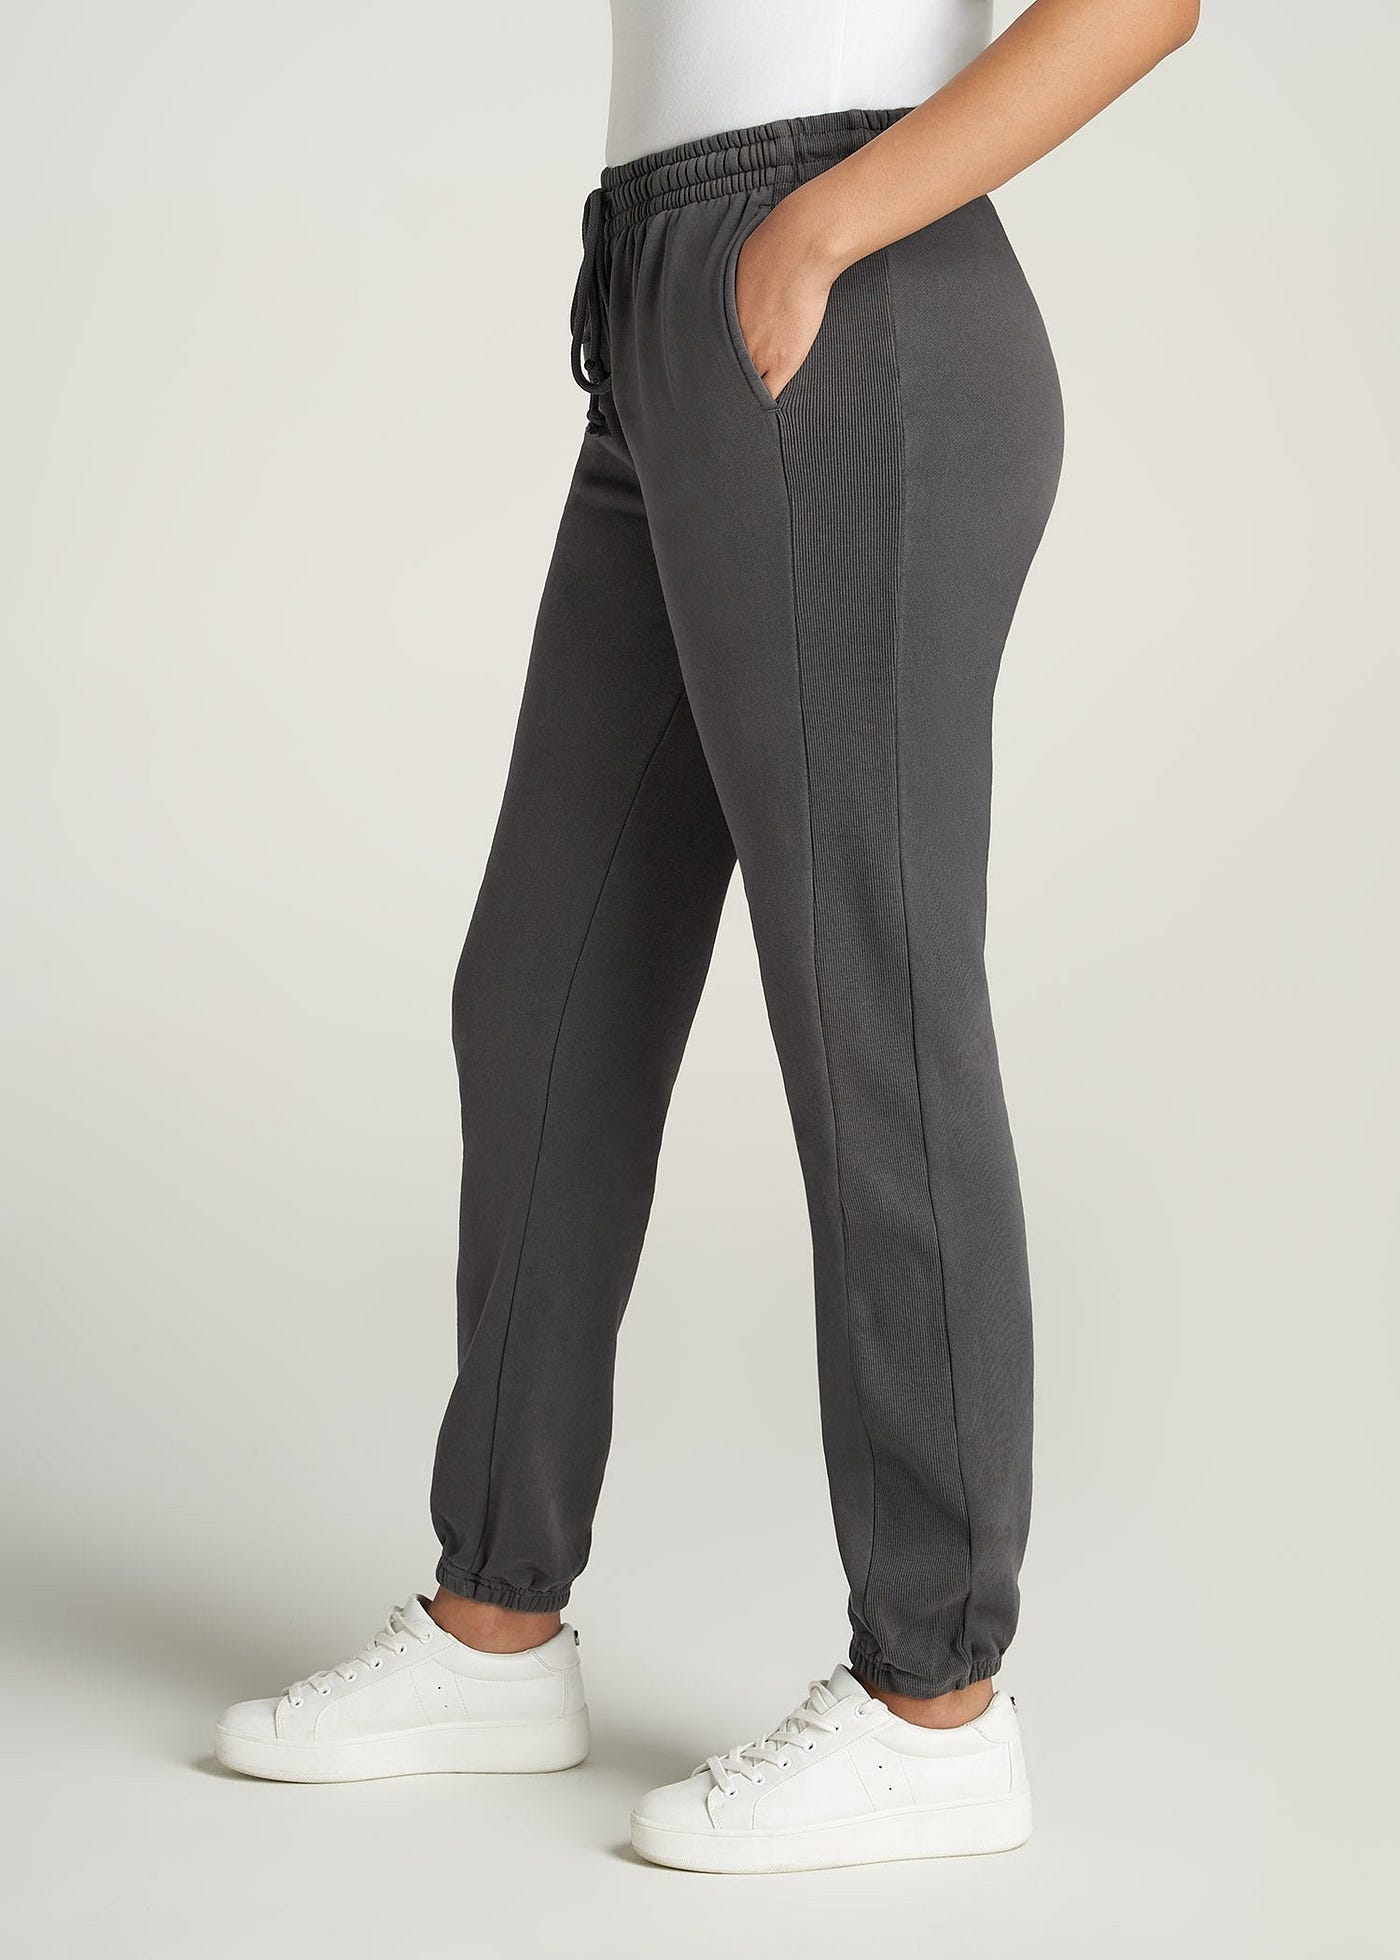 Sweatpants Fashion for Tall Women: Tips and Tricks, by Fashion Ultra